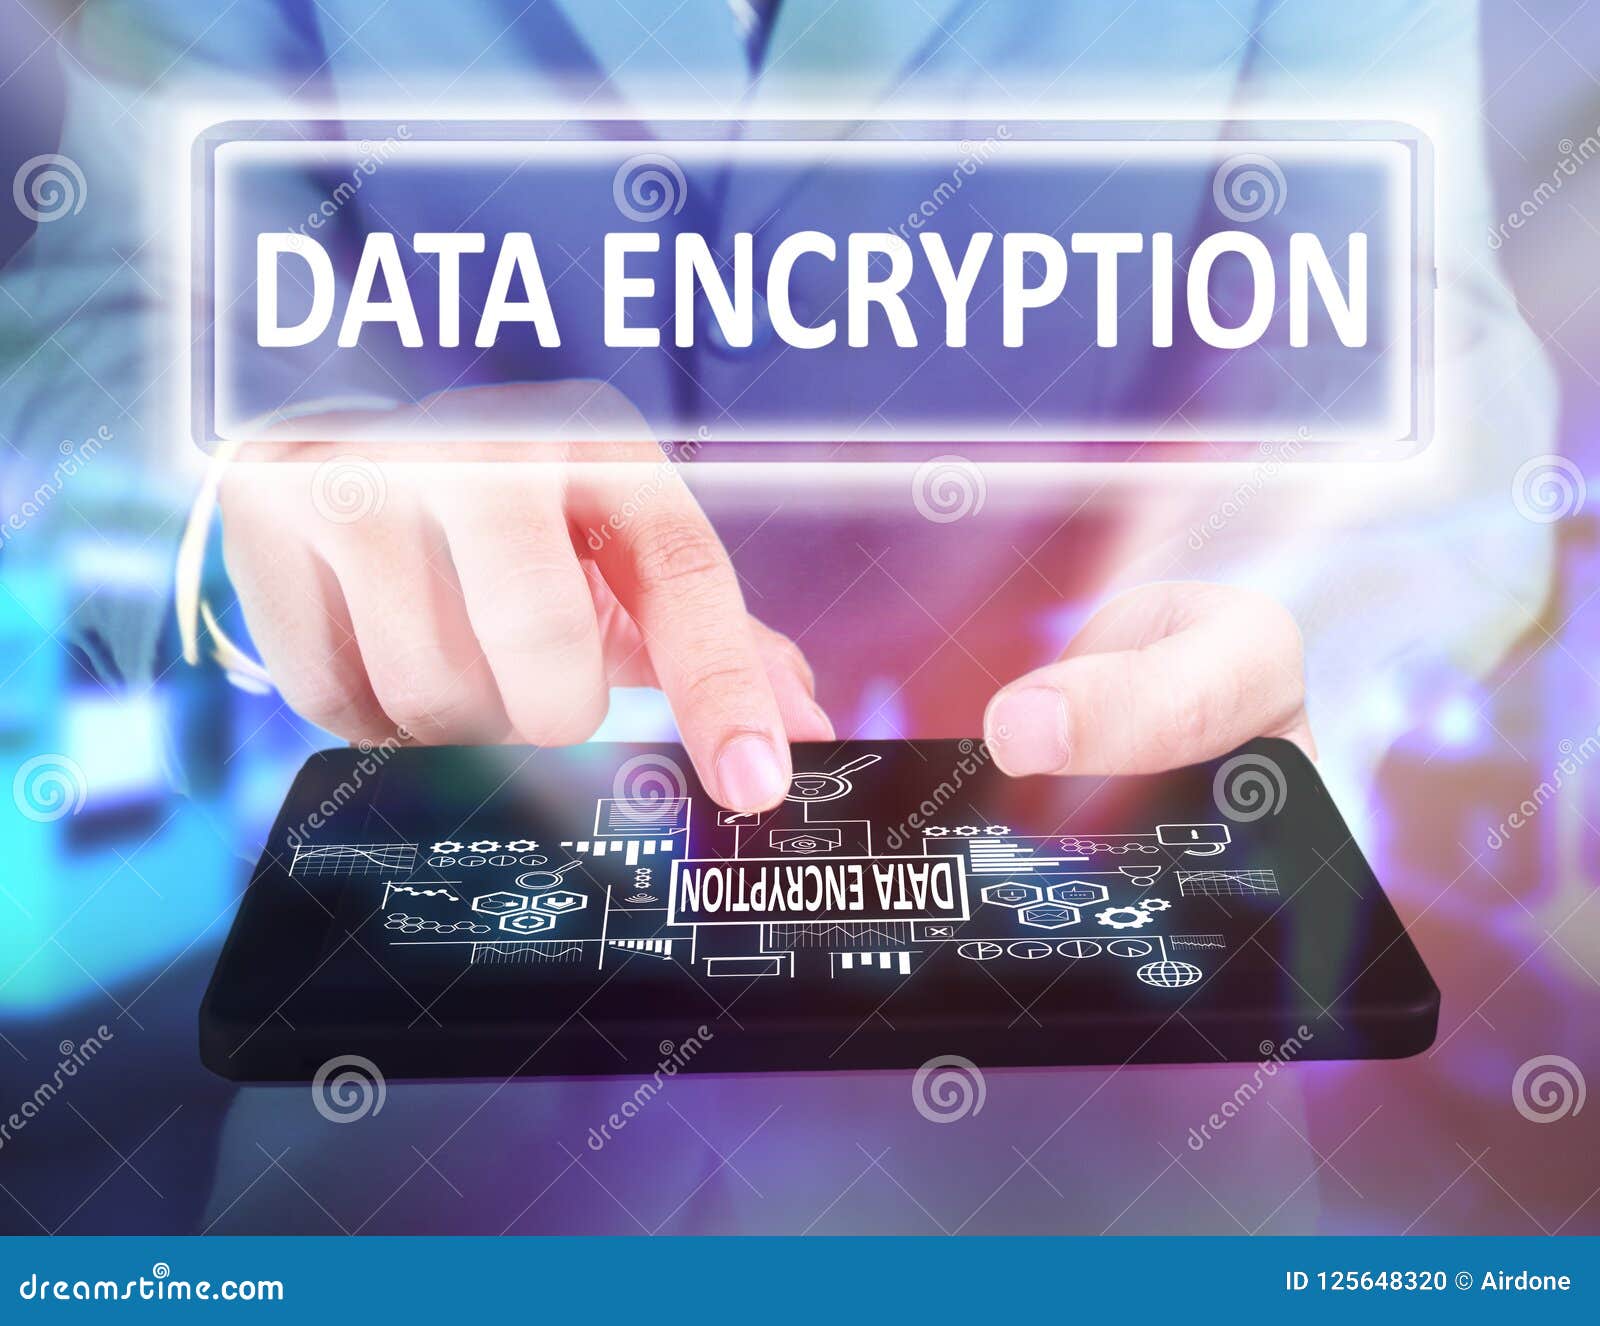 data encryption in business concept